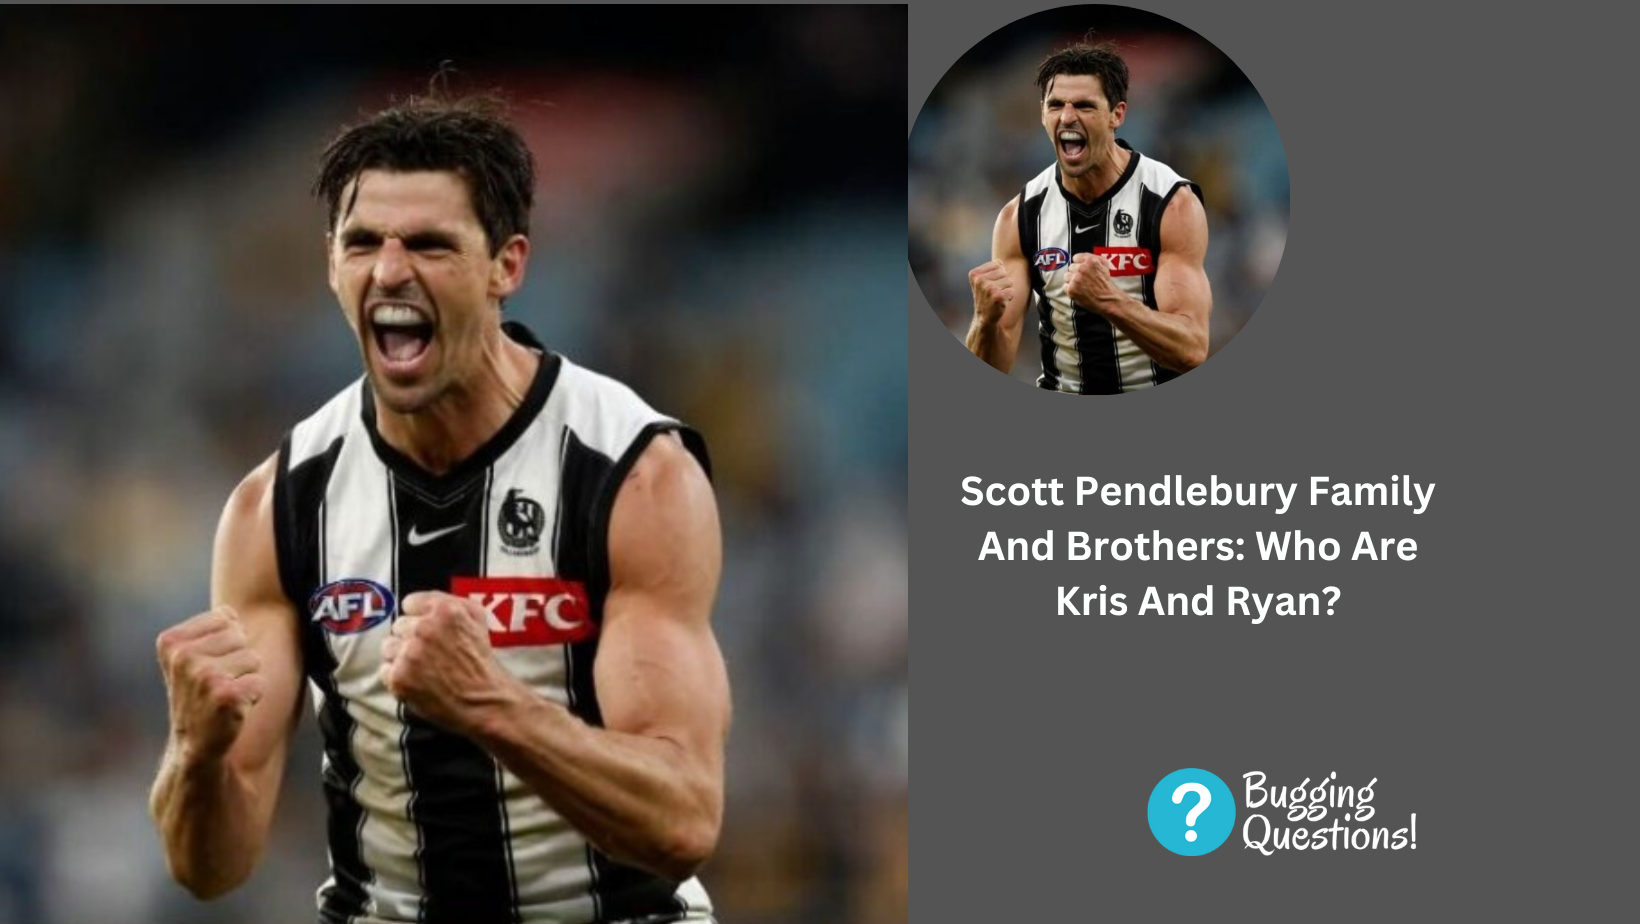 Scott Pendlebury Family And Brothers: Who Are Kris And Ryan?